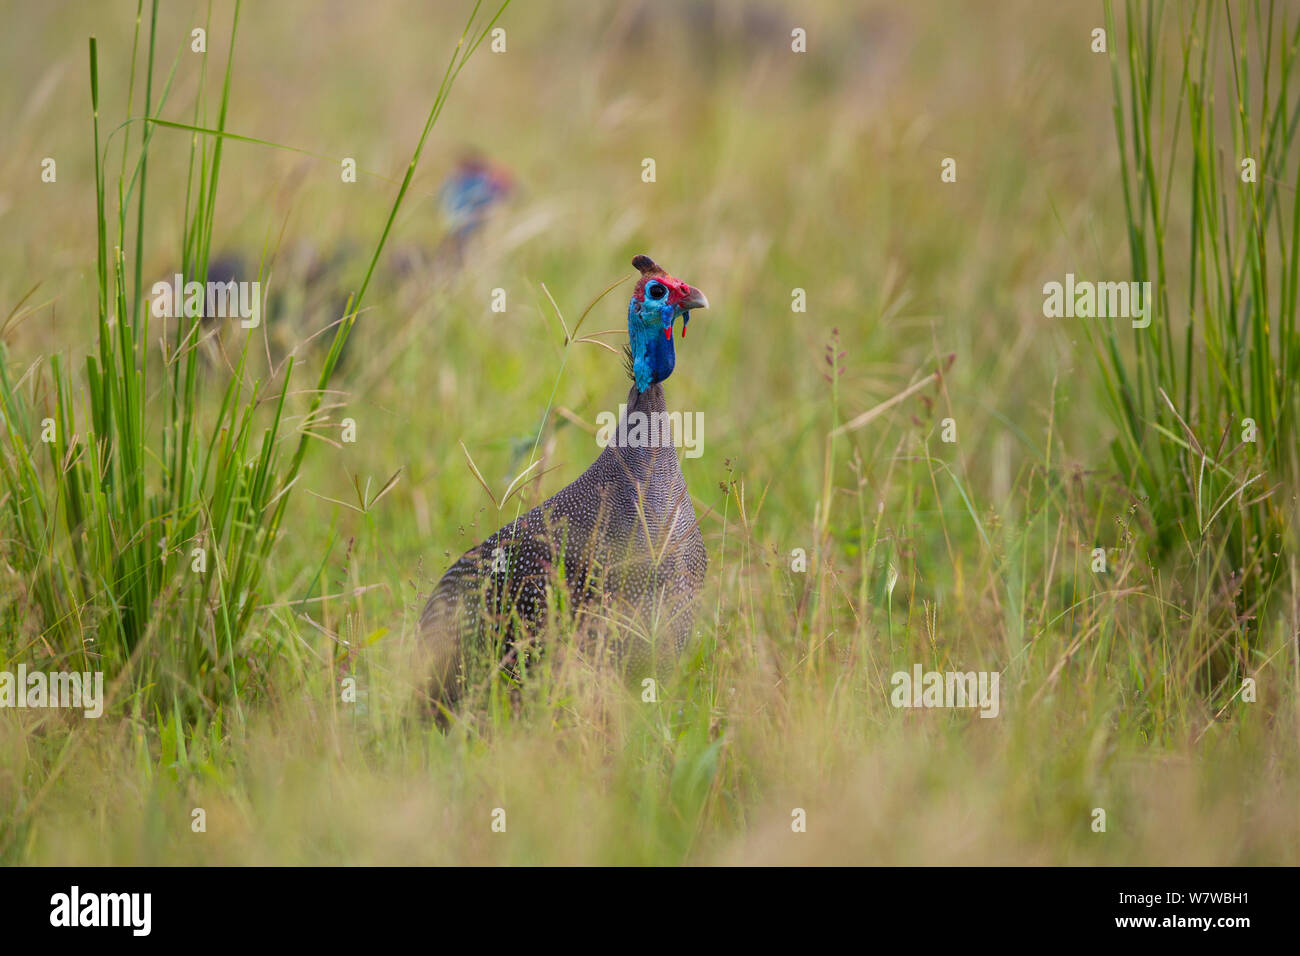 Helmeted guineafowl (Numida meleagris) looking out over tall grass, South Luangwa National Park, Zambia. March. Stock Photo